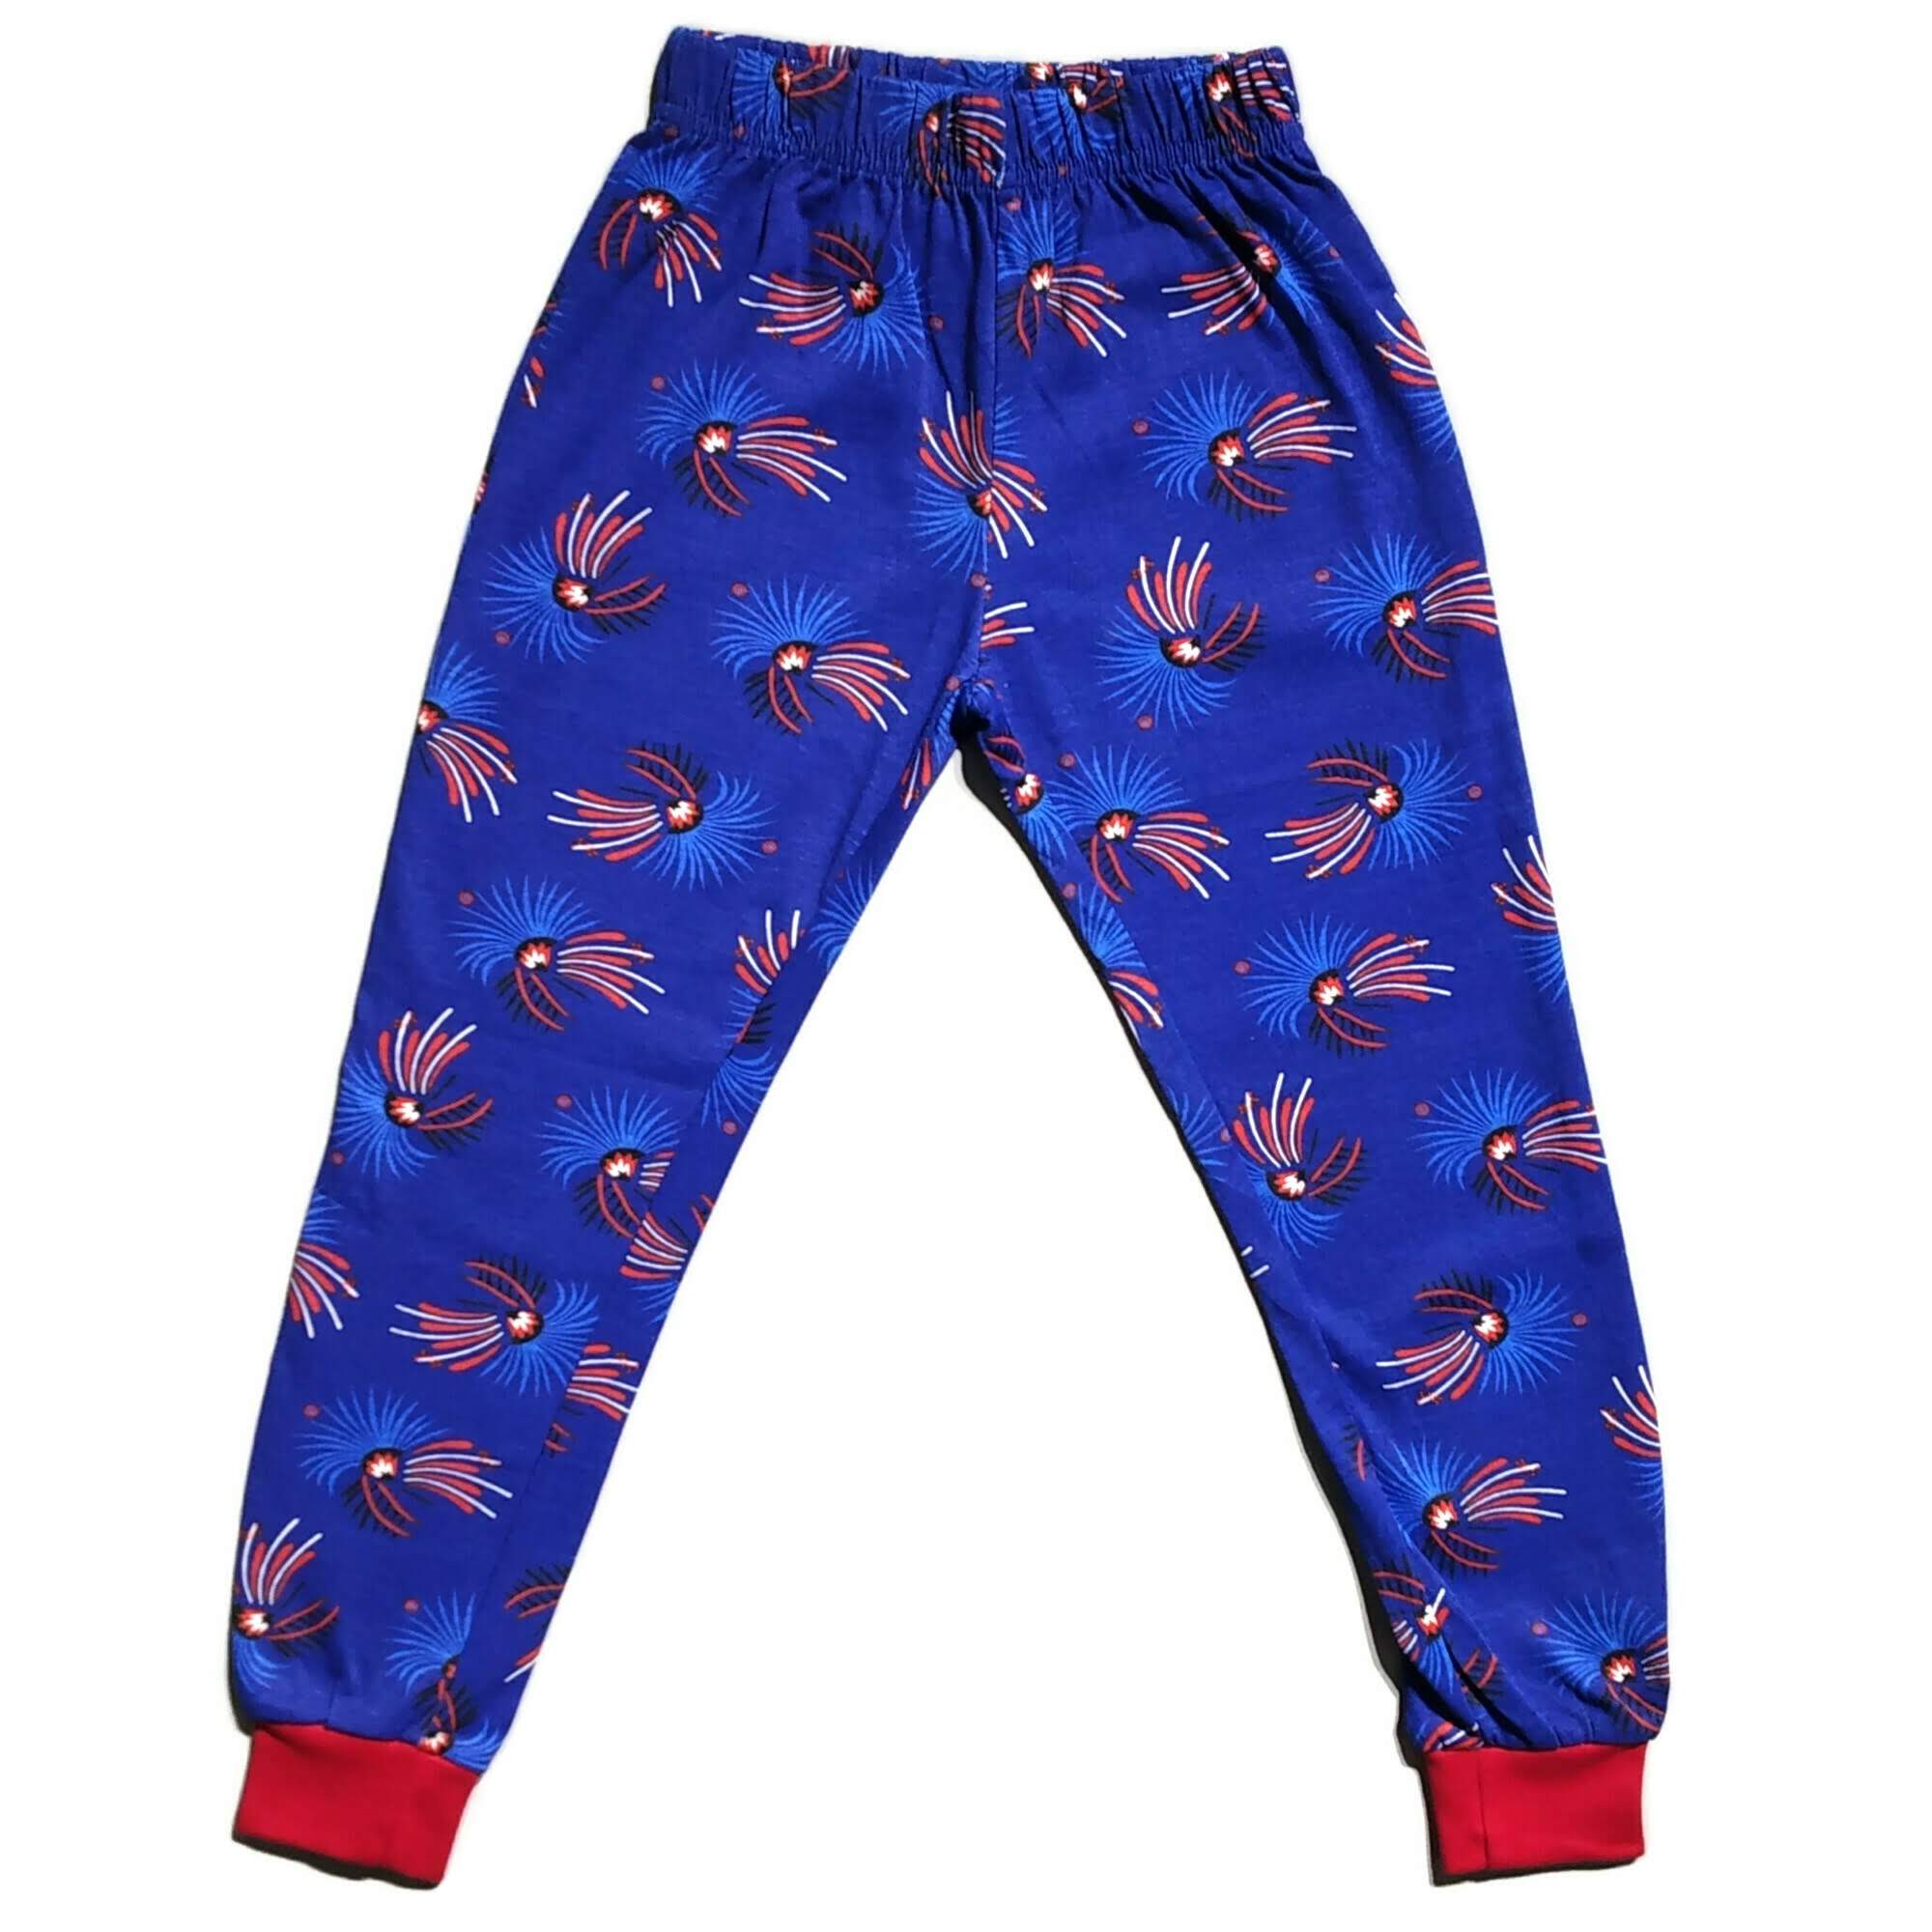 Xl Blue Girls Legging - Get Best Price from Manufacturers & Suppliers in  India